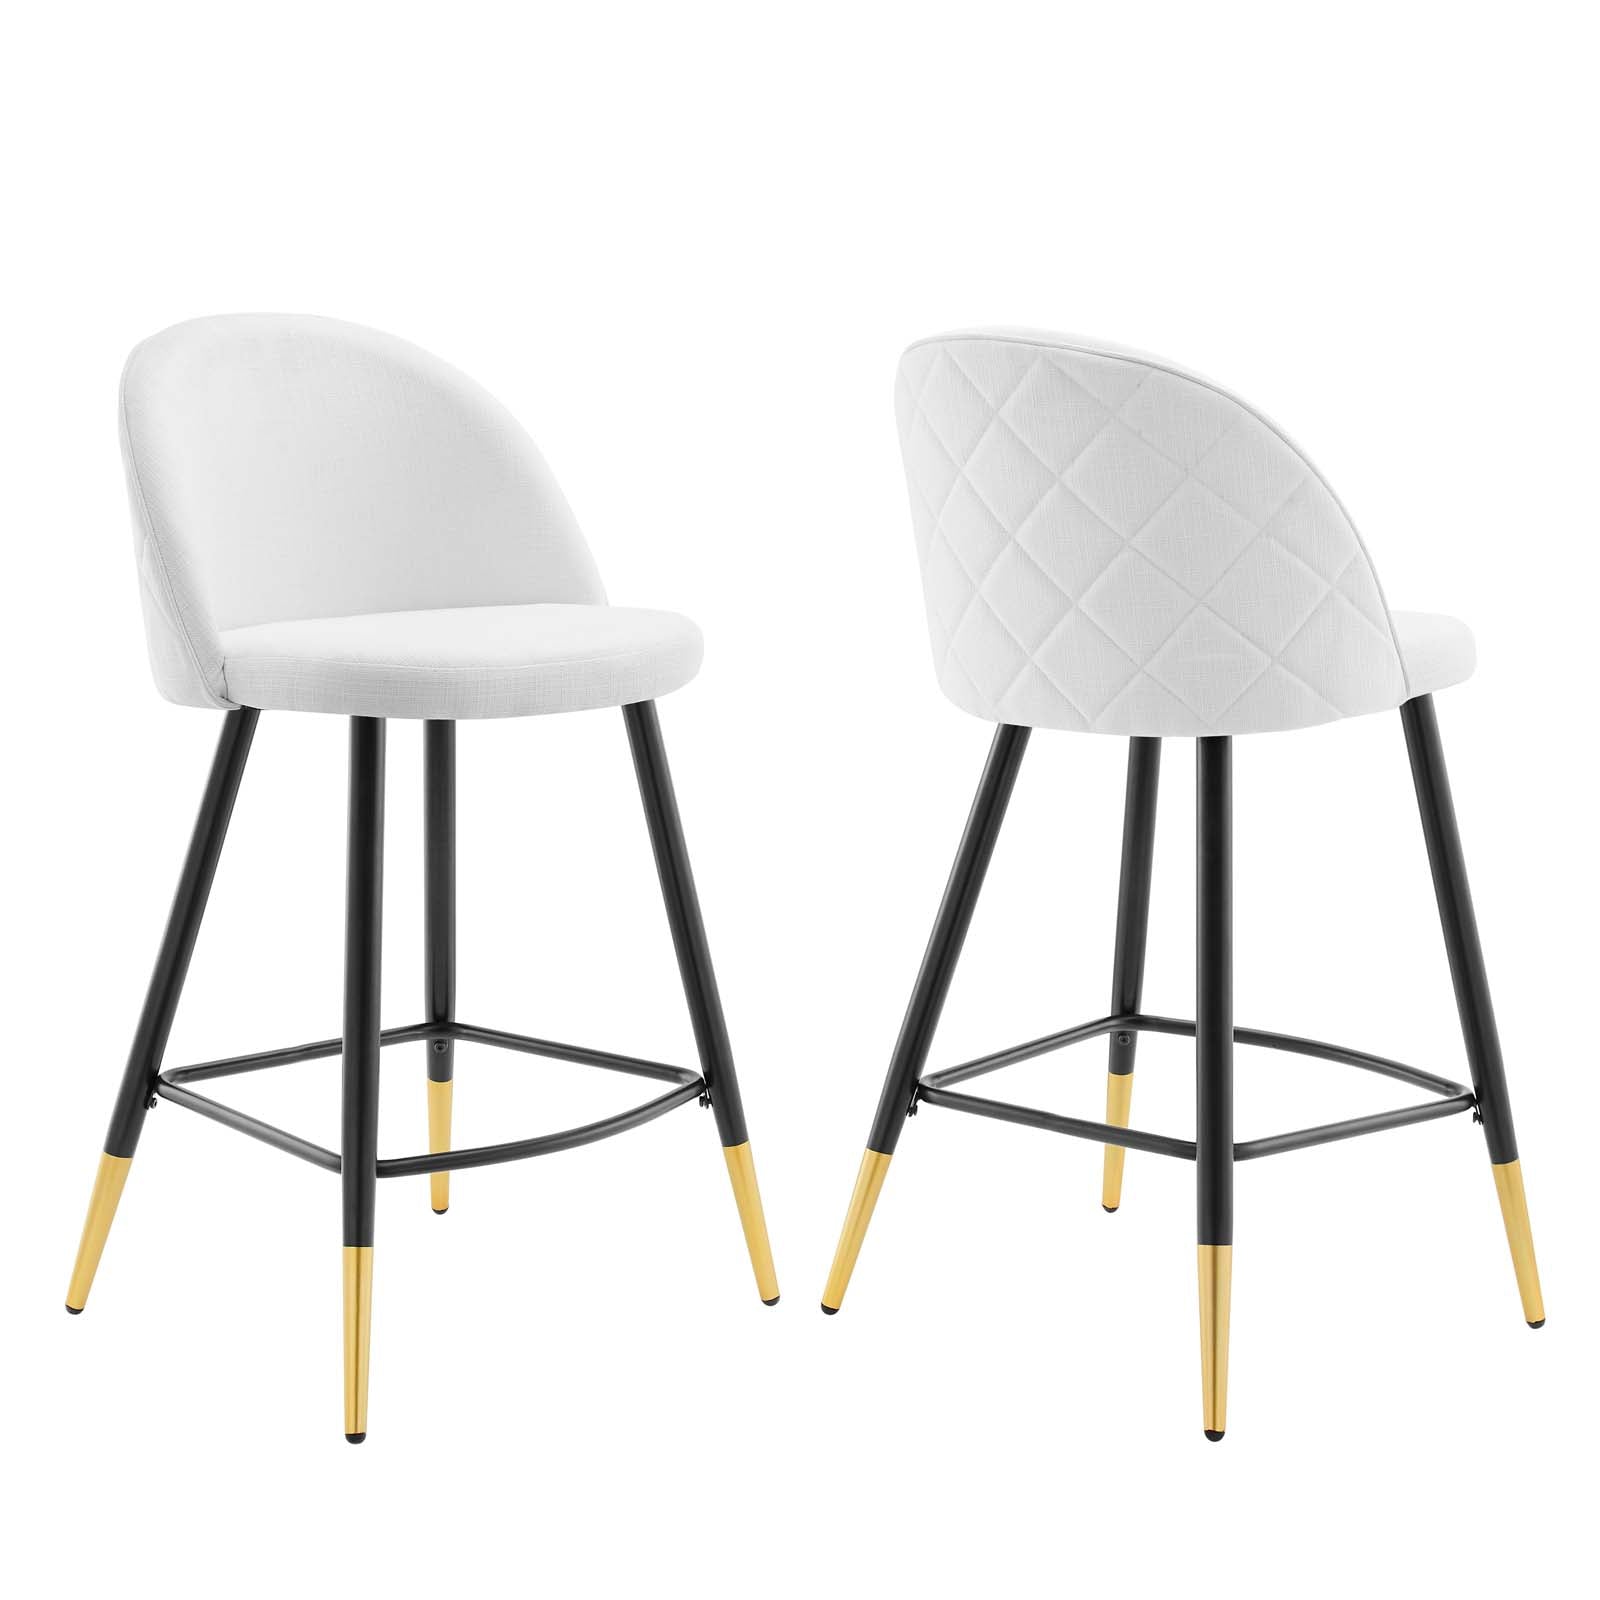 Modway Barstools - Cordial Fabric Counter Stools - ( Set of 2 ) White